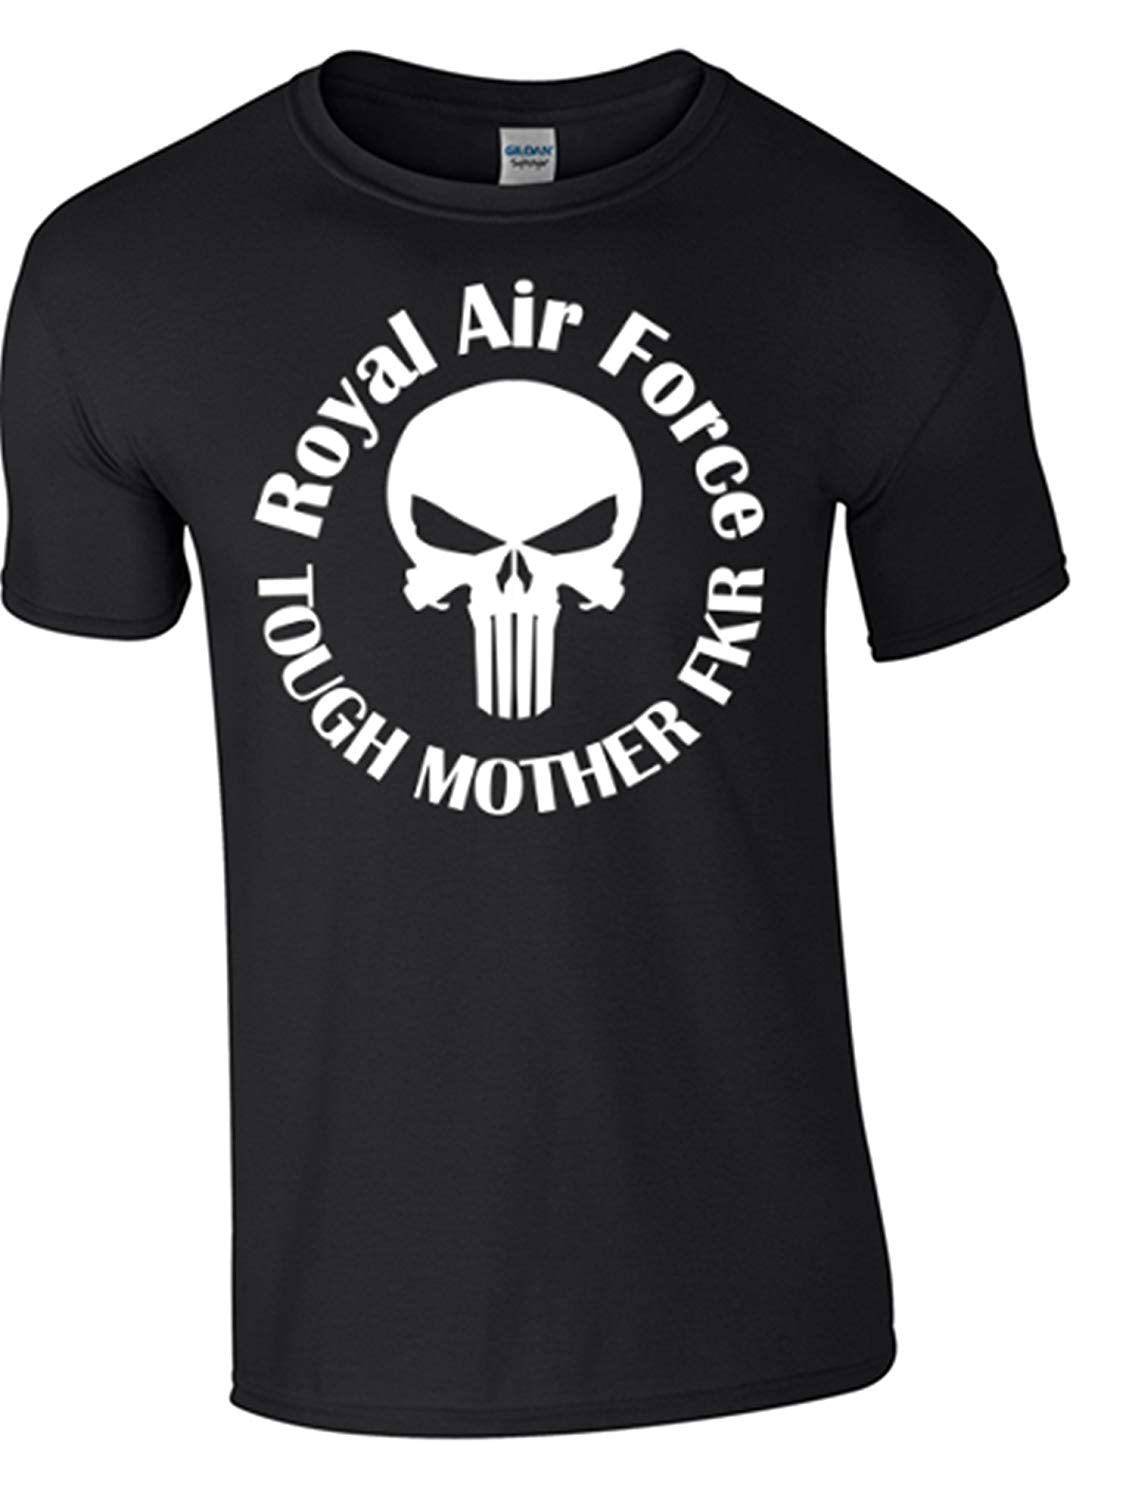 Royal Air Force TMF T-Shirt - Army 1157 kit Black / XXL Army 1157 Kit Veterans Owned Business